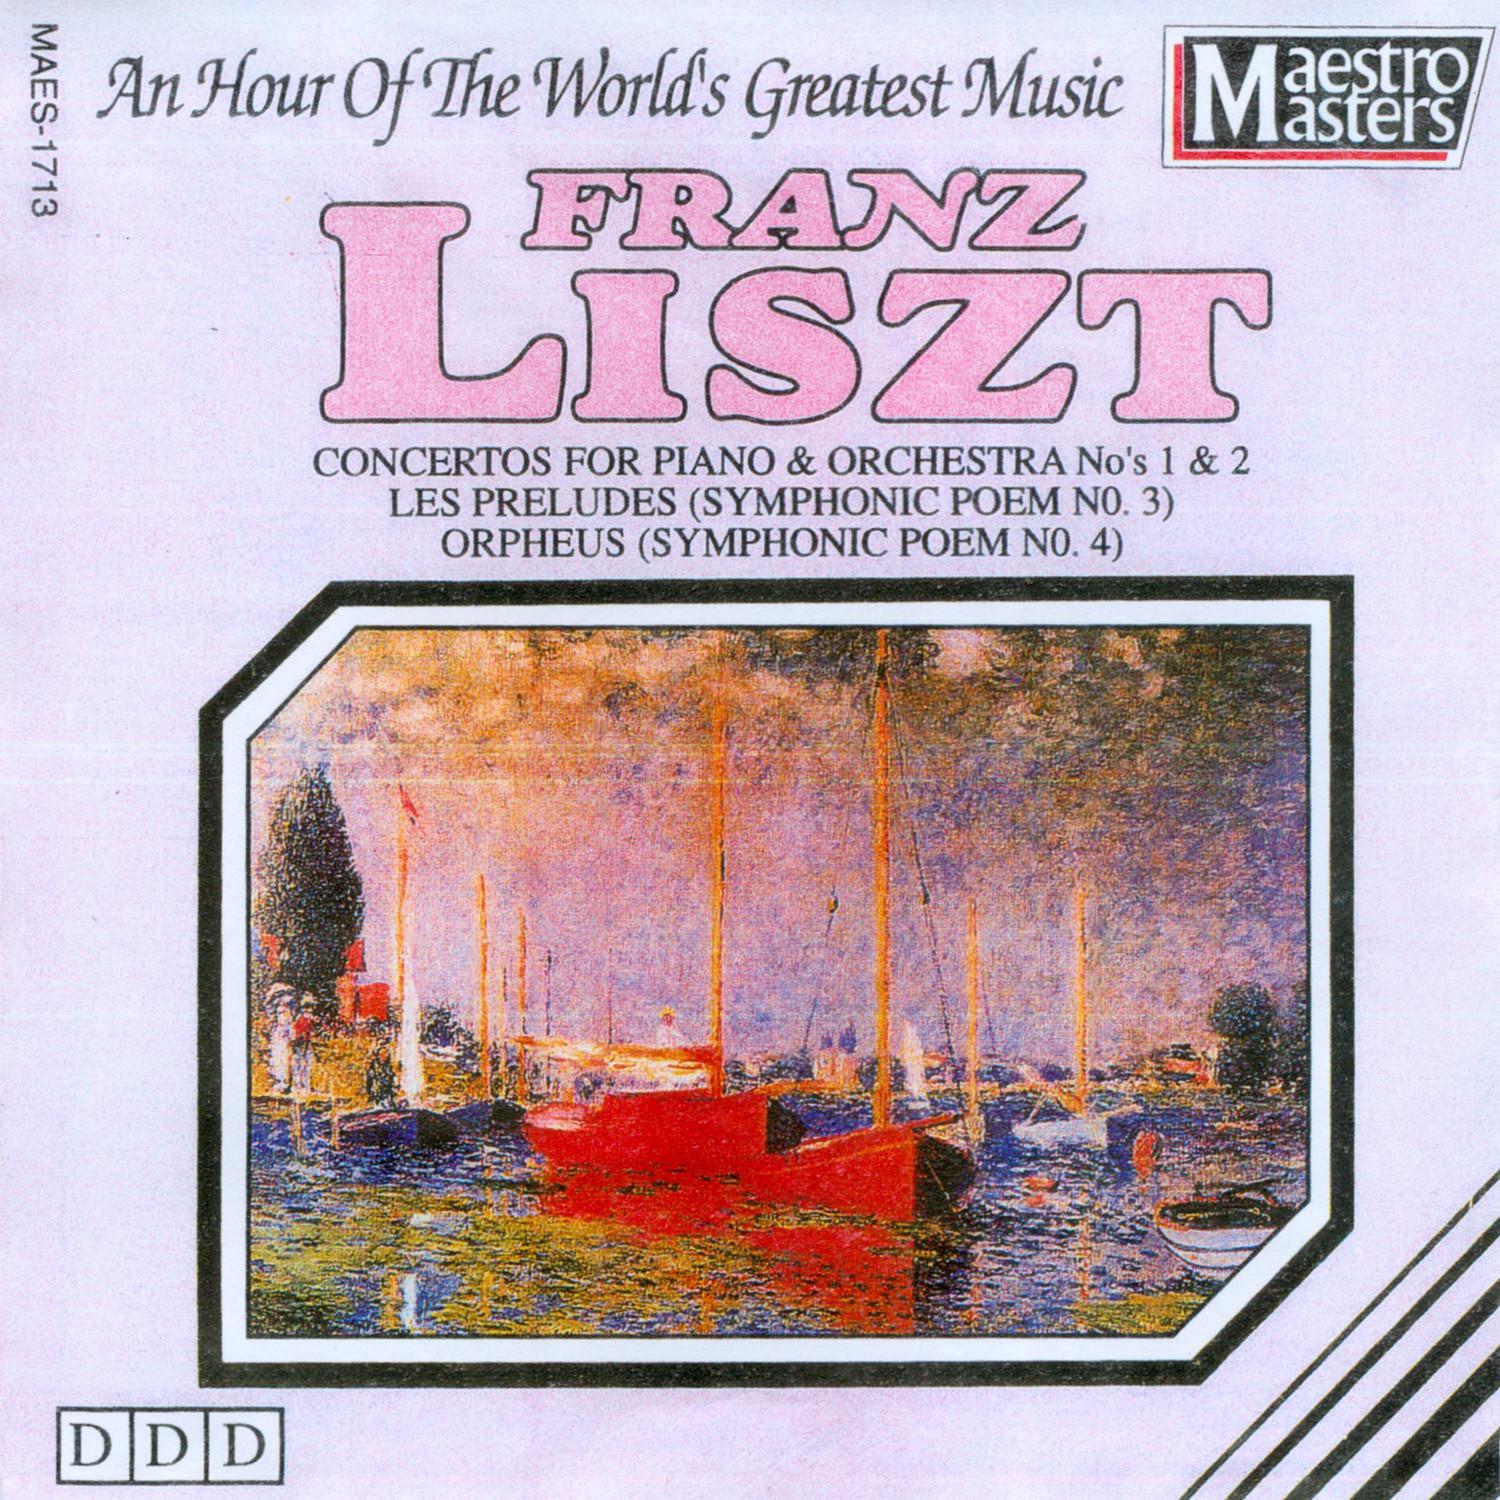 Liszt - Concertos for Piano and Orchestra